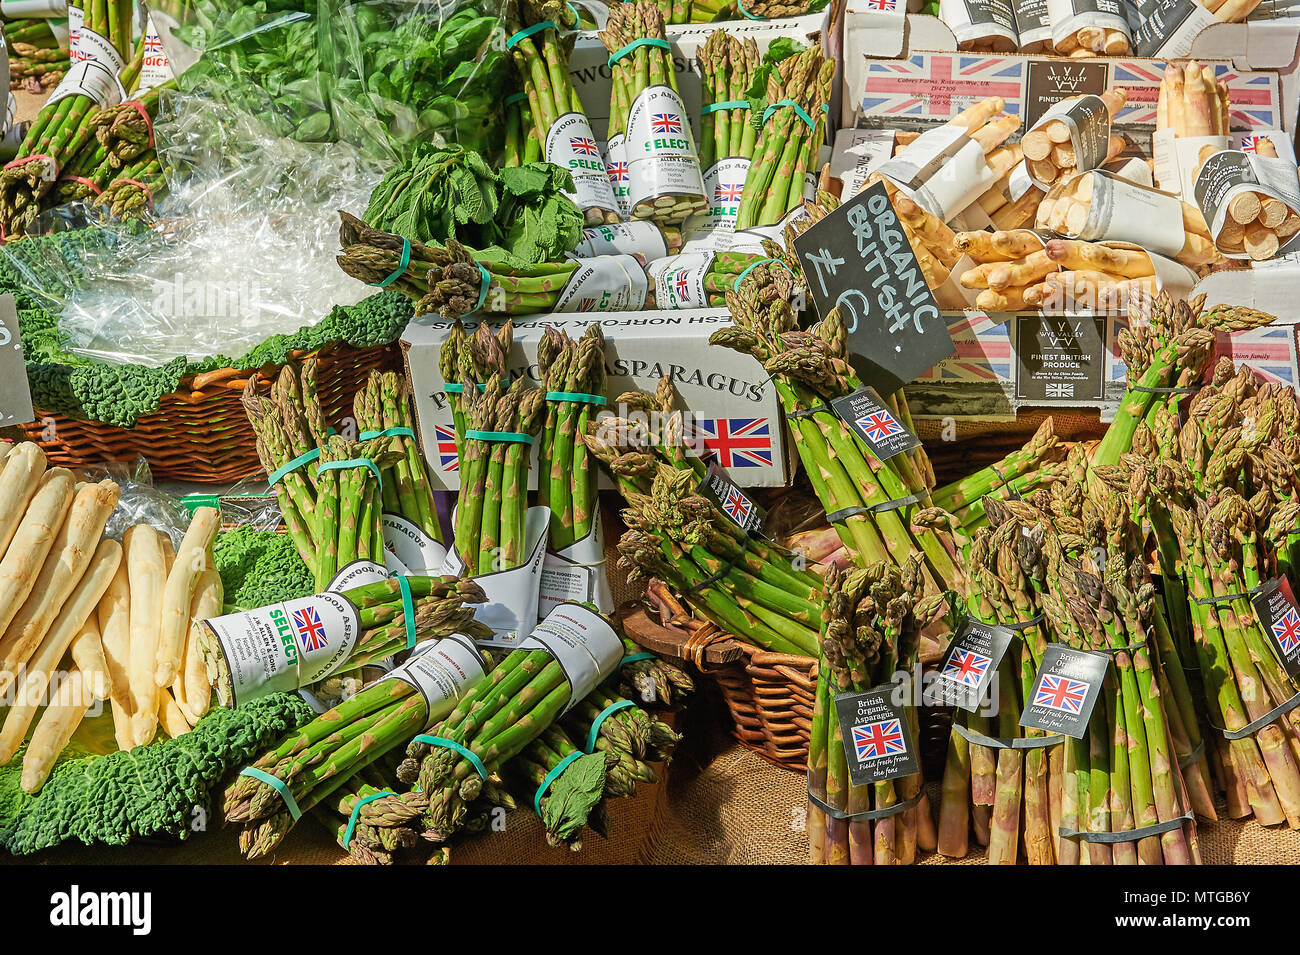 Fruit and vegetables on sale in Borough Market, London Stock Photo